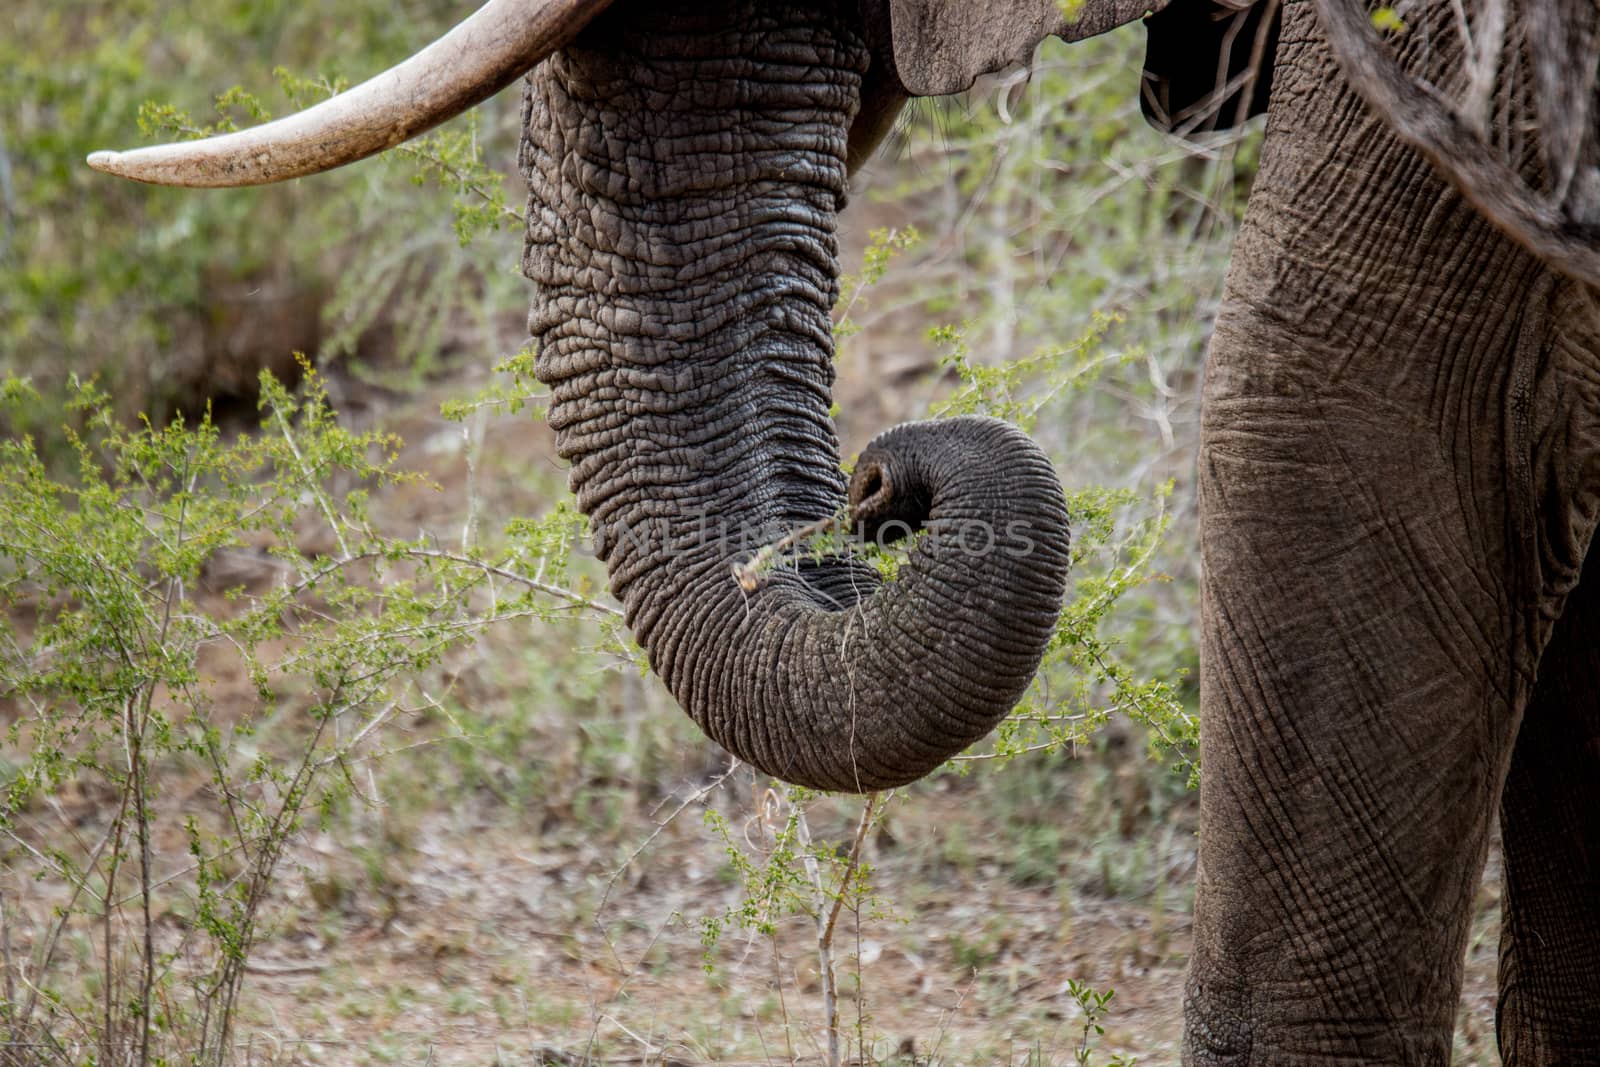 Trunk of grazing Elephant in the Kruger National Park, South Africa.